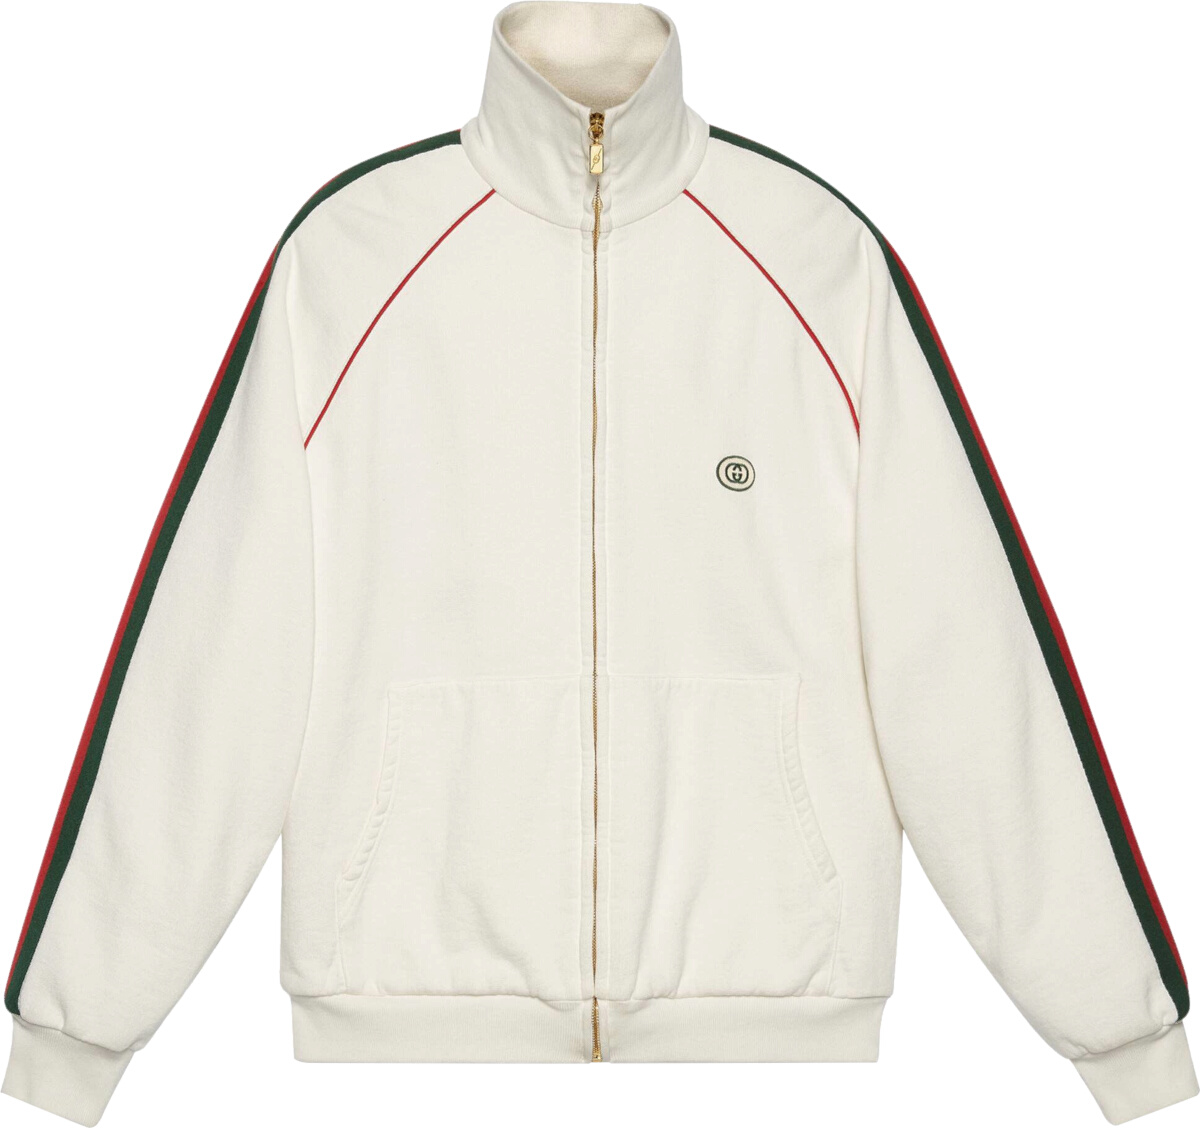 Gucci White & Web Sidestripe Track Jacket | Incorporated Style